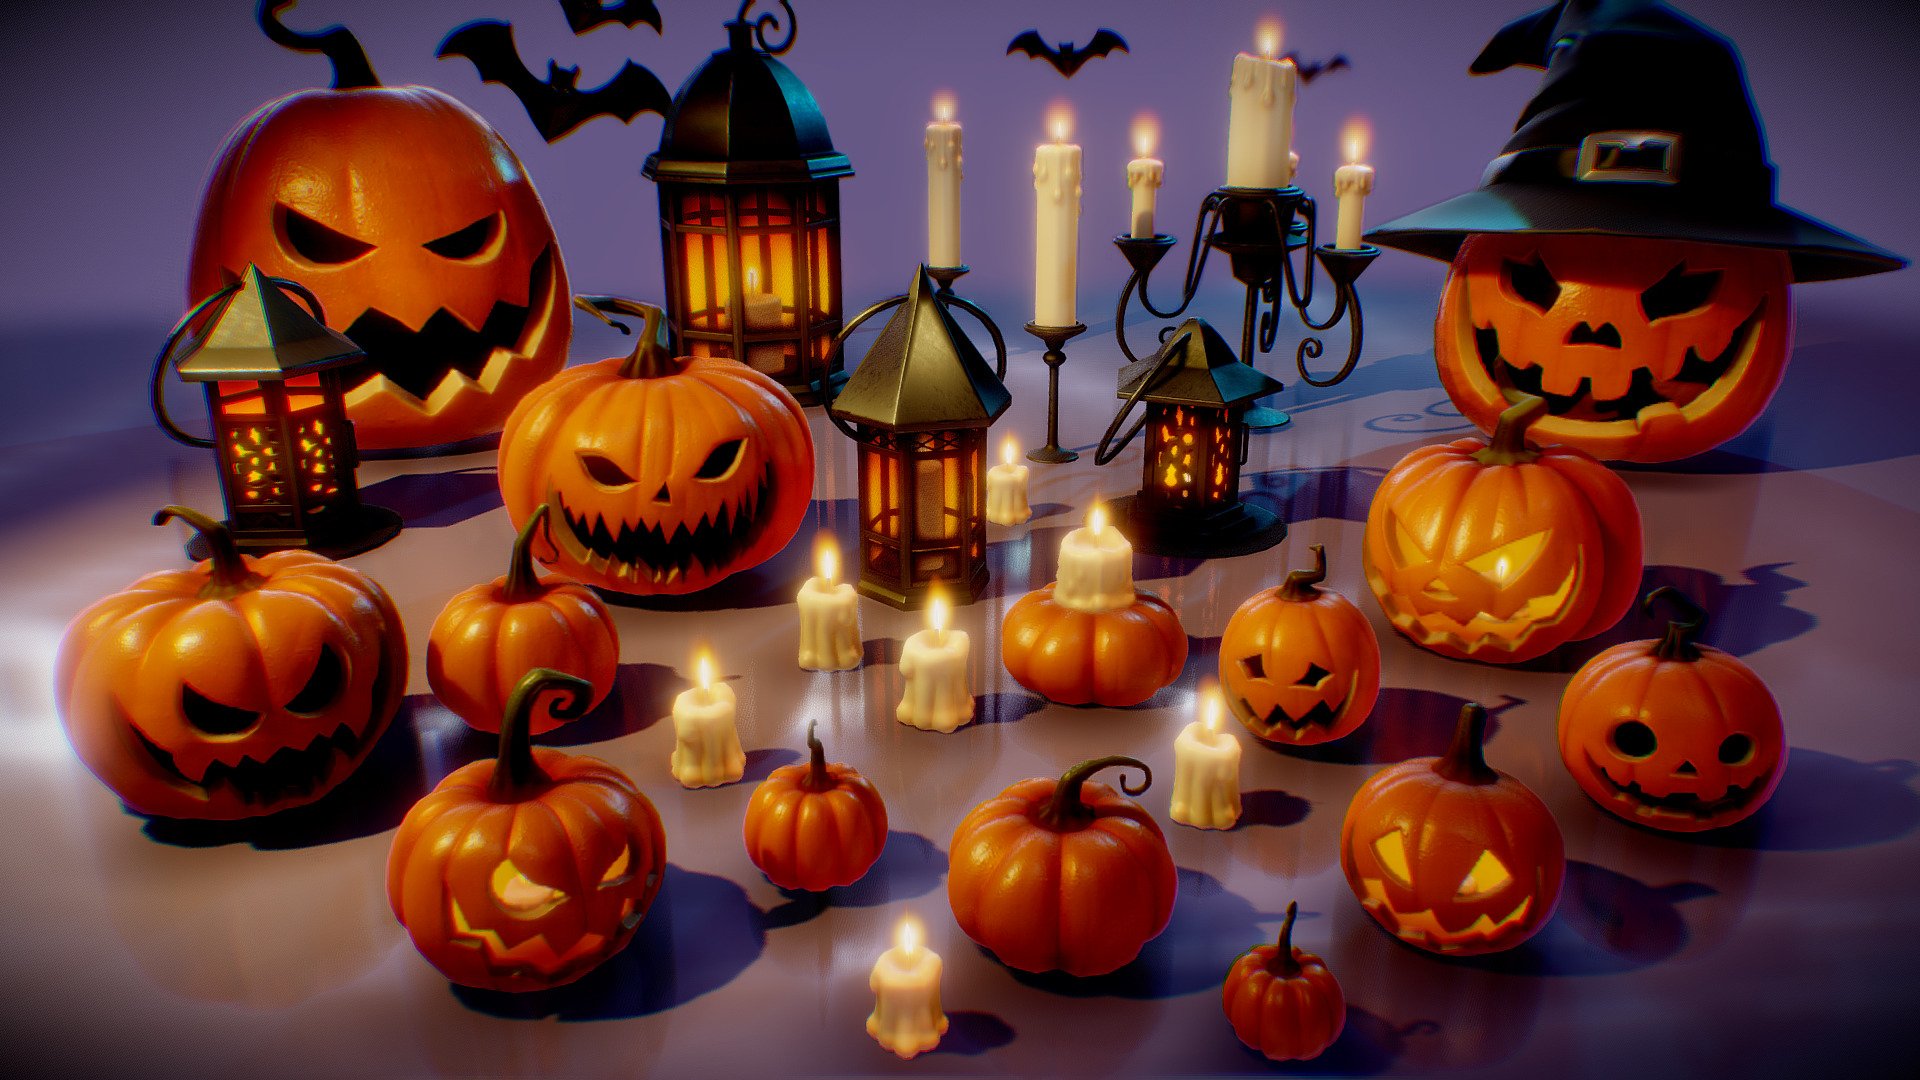 3DSmax scene included

Specs: .OBJ / .FBX format, 48.0890 tris, unwrapped

Maps: .PNG 

Albedo, Roughness, Metallic, Tangent Normals, Object Normals, SSS, Ambient Occlusion, Thickness, Position, Curvature

Happy Halloween! : ) - Halloween Pumpkin Decorations - Buy Royalty Free 3D model by Thanos Bompotas (@ibizanhound) 3d model